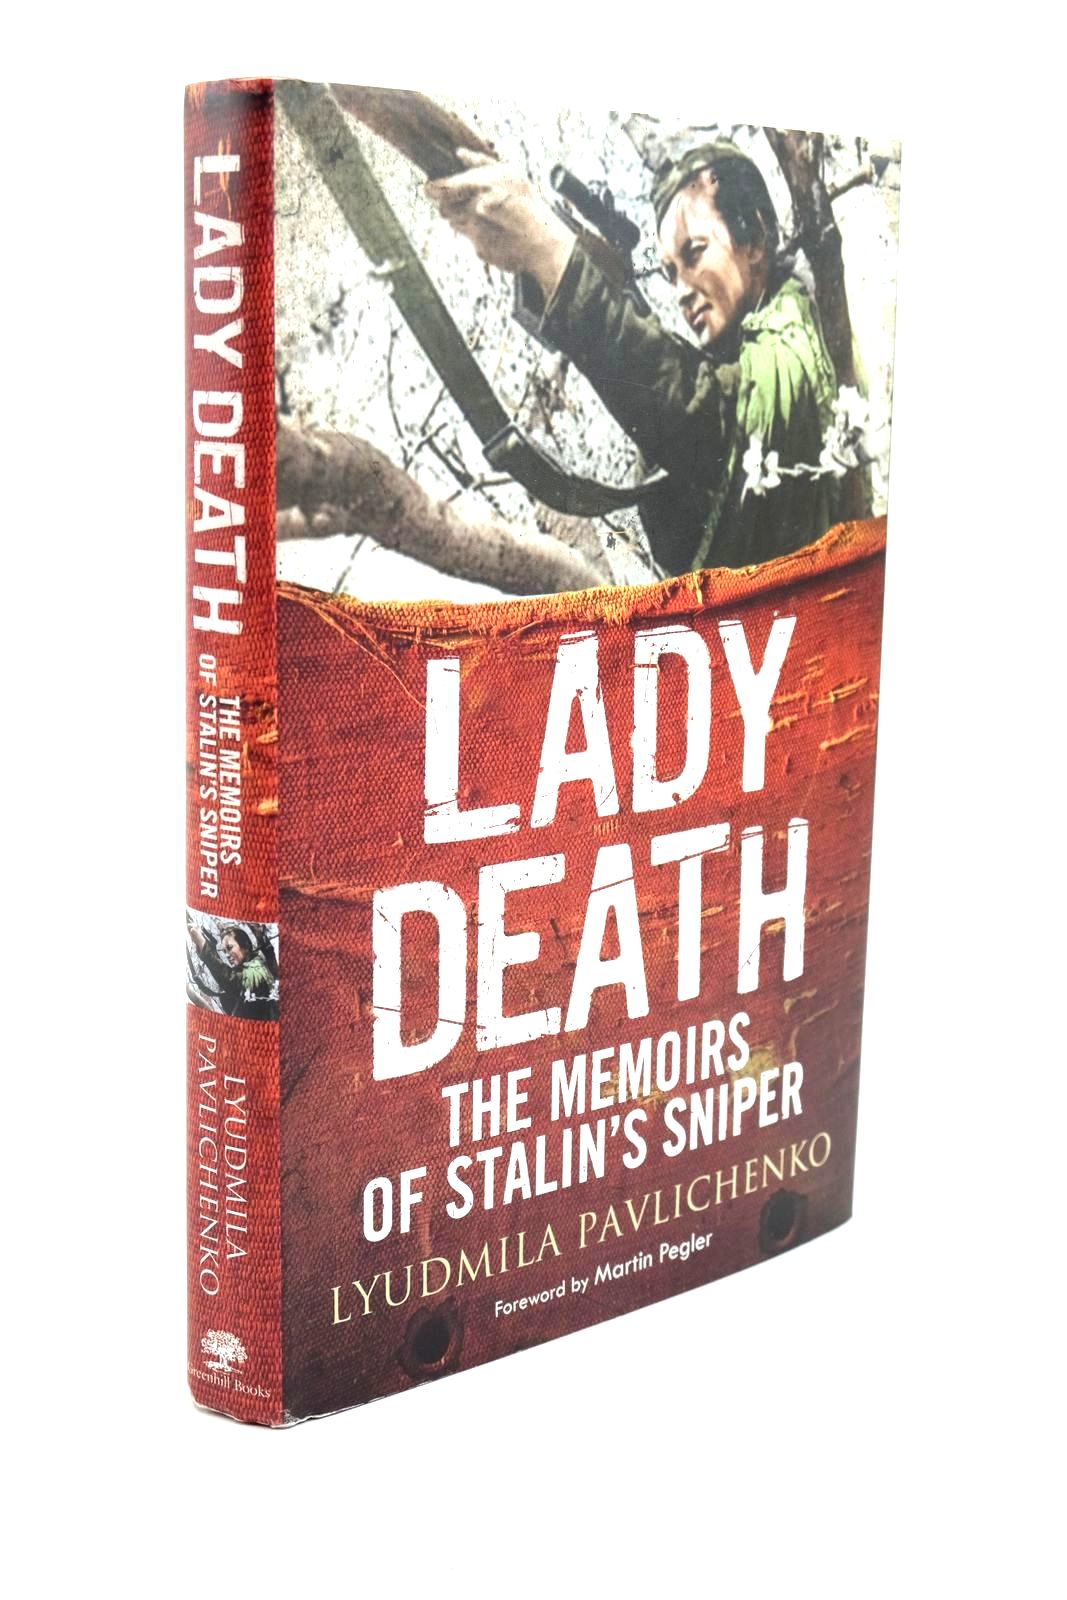 Photo of LADY DEATH THE MEMOIRS OF STALIN'S SNIPER written by Pavlichenko, Lyudmila published by Greenhill Books (STOCK CODE: 1321486)  for sale by Stella & Rose's Books